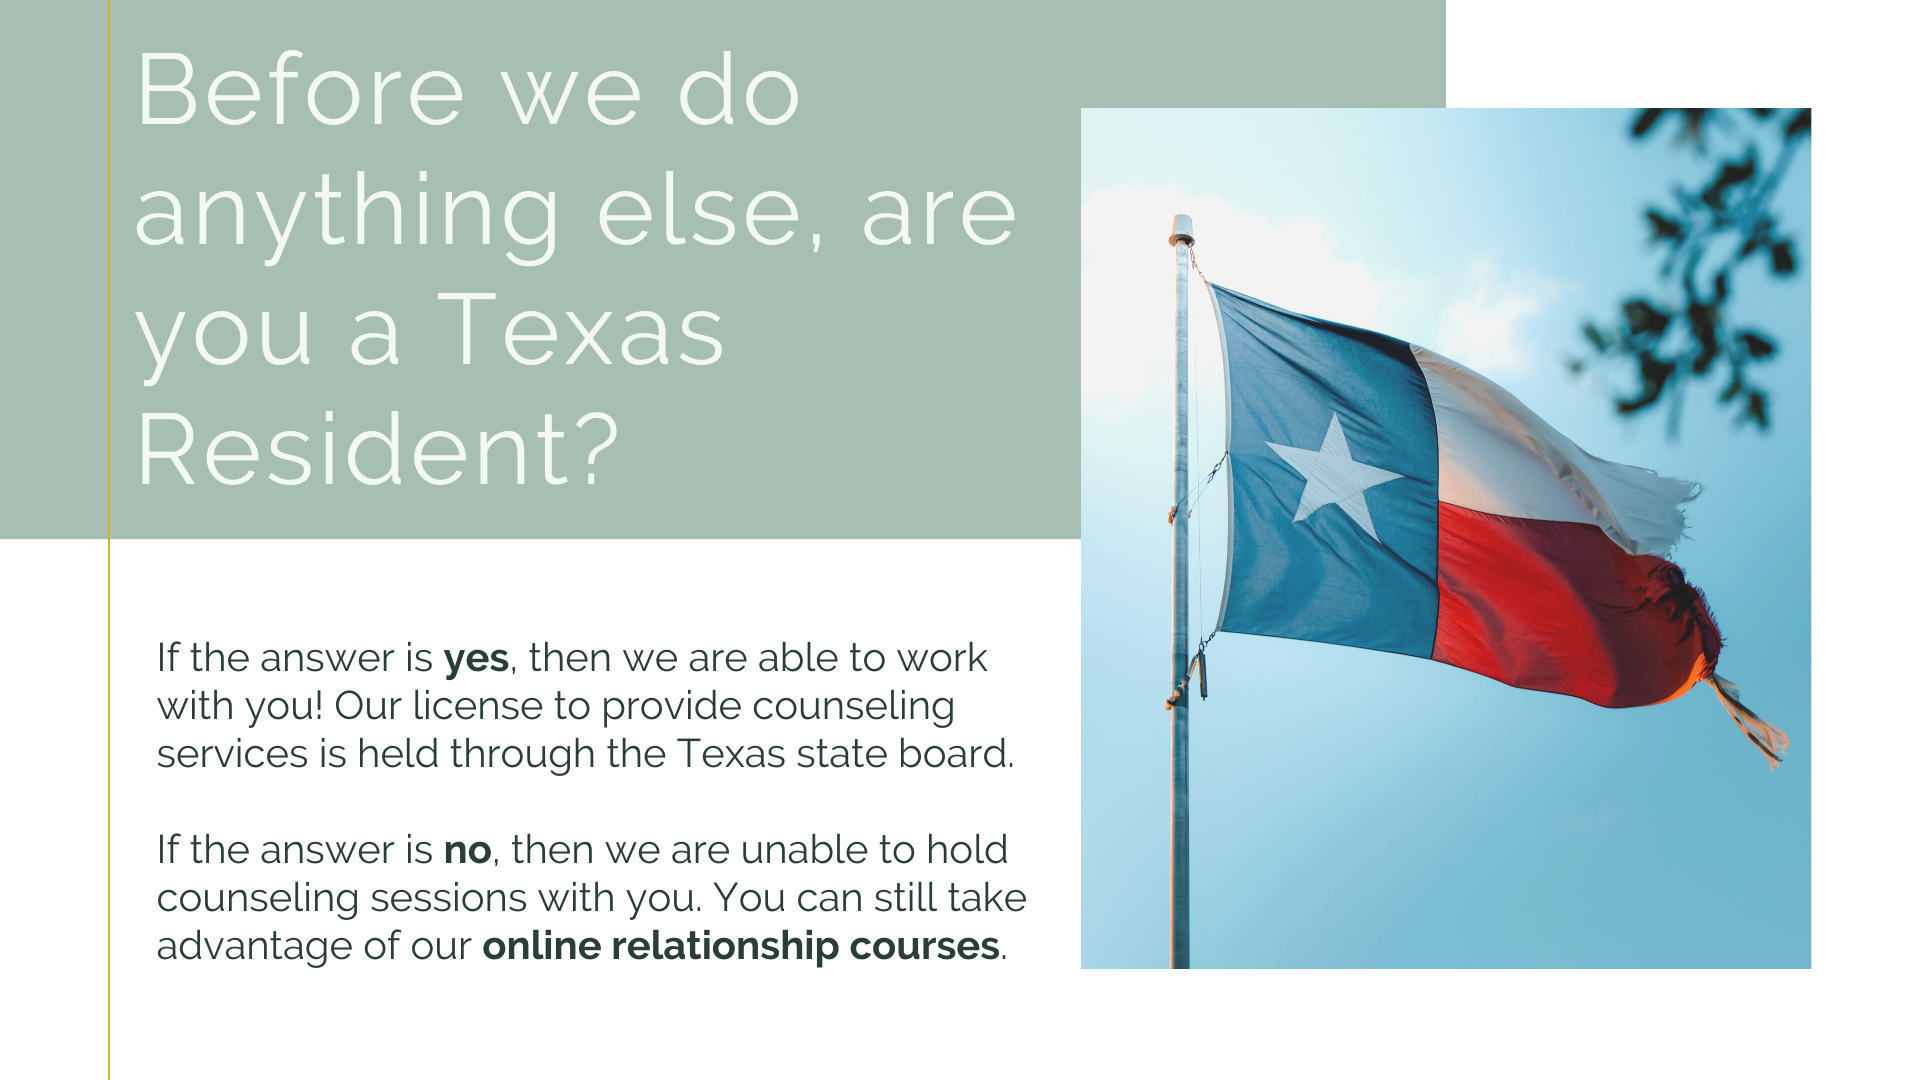 are you a texas resident?